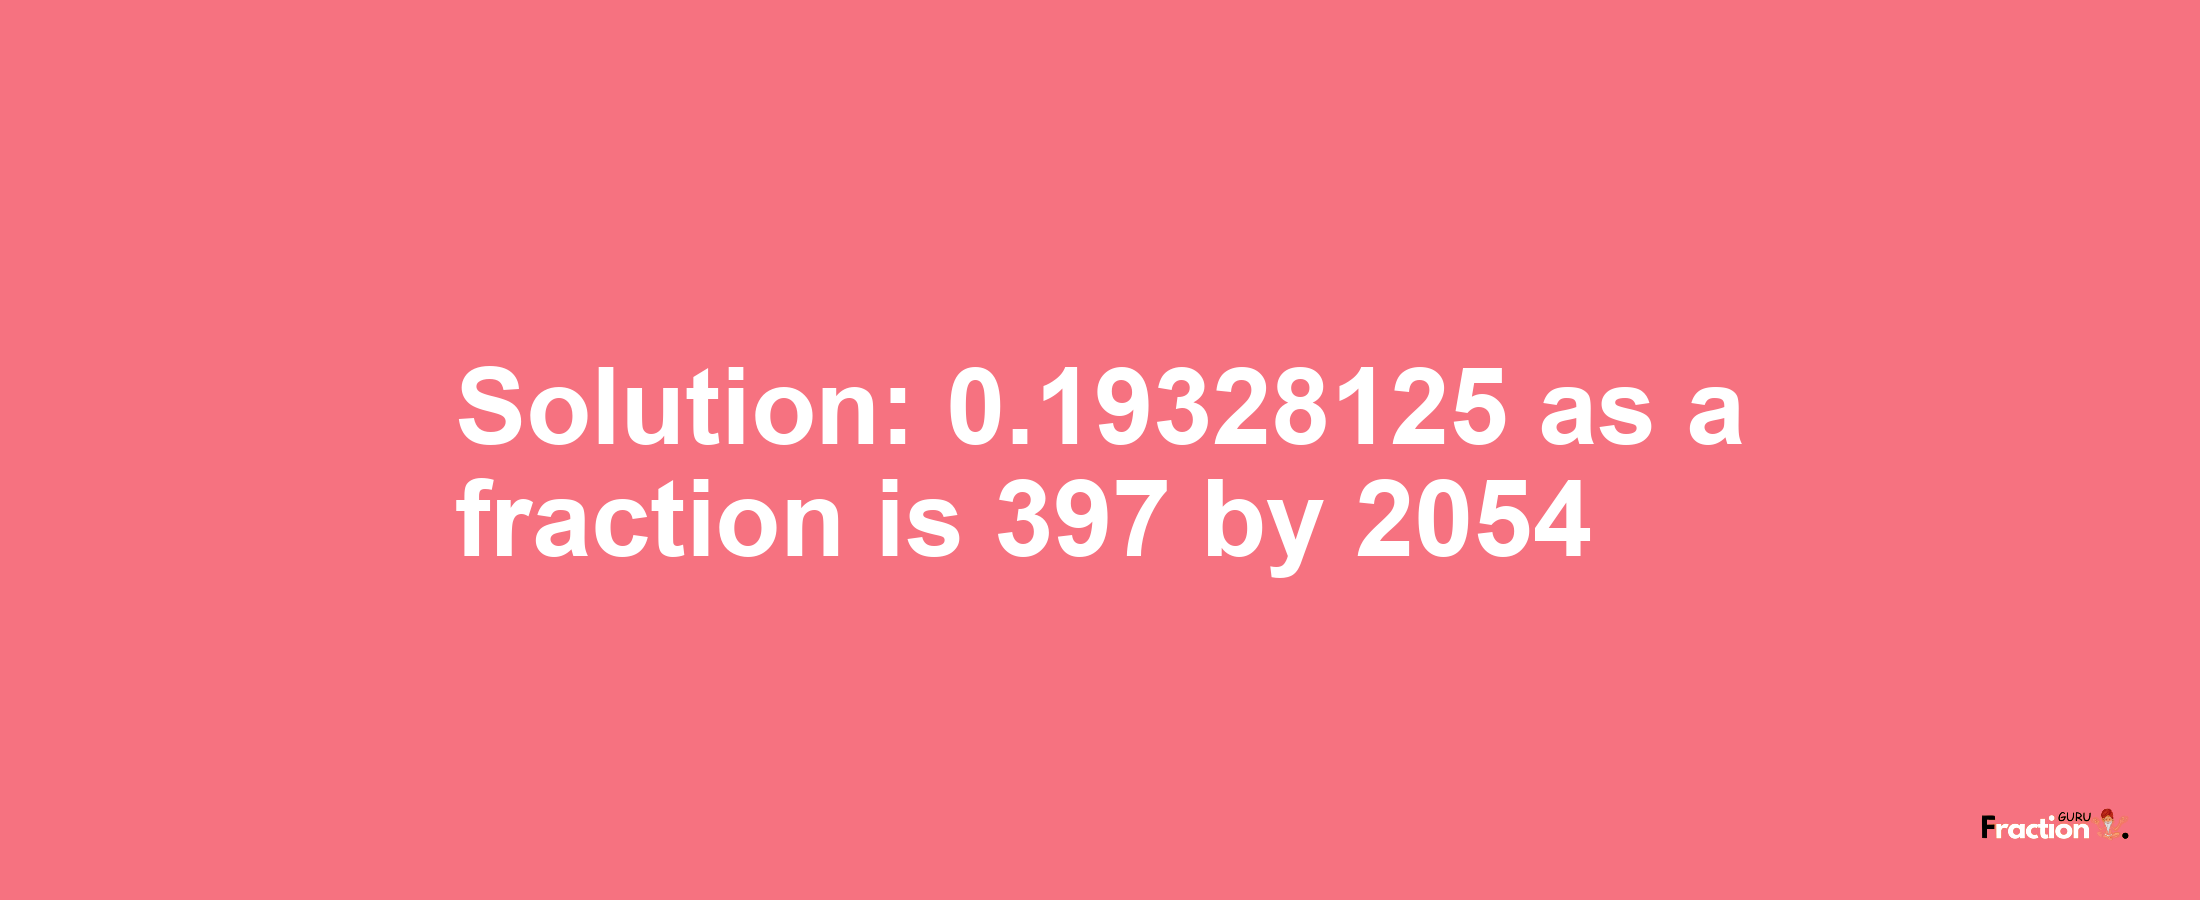 Solution:0.19328125 as a fraction is 397/2054